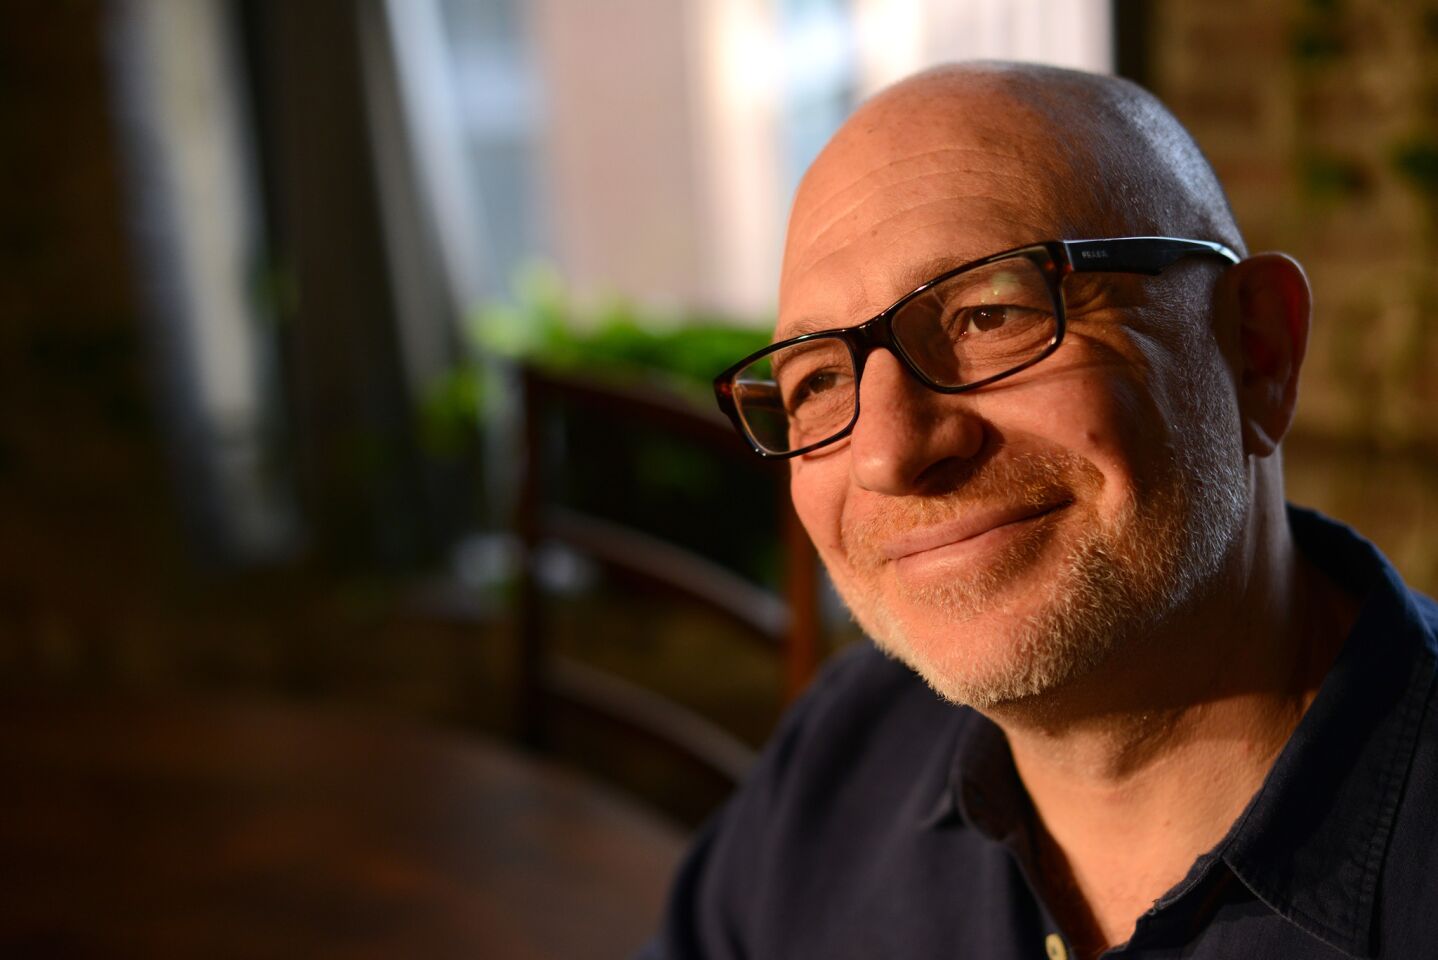 The Academy Award-winning screenwriter of "A Beautiful Mind" and writer of "Angels and Demons," Akiva Goldsman has numerous other films and TV credits. Going in front of the camera, Goldsman portrayed Vulcan Council Member No. 1 in 2009's "Star Trek" movie incarnation.